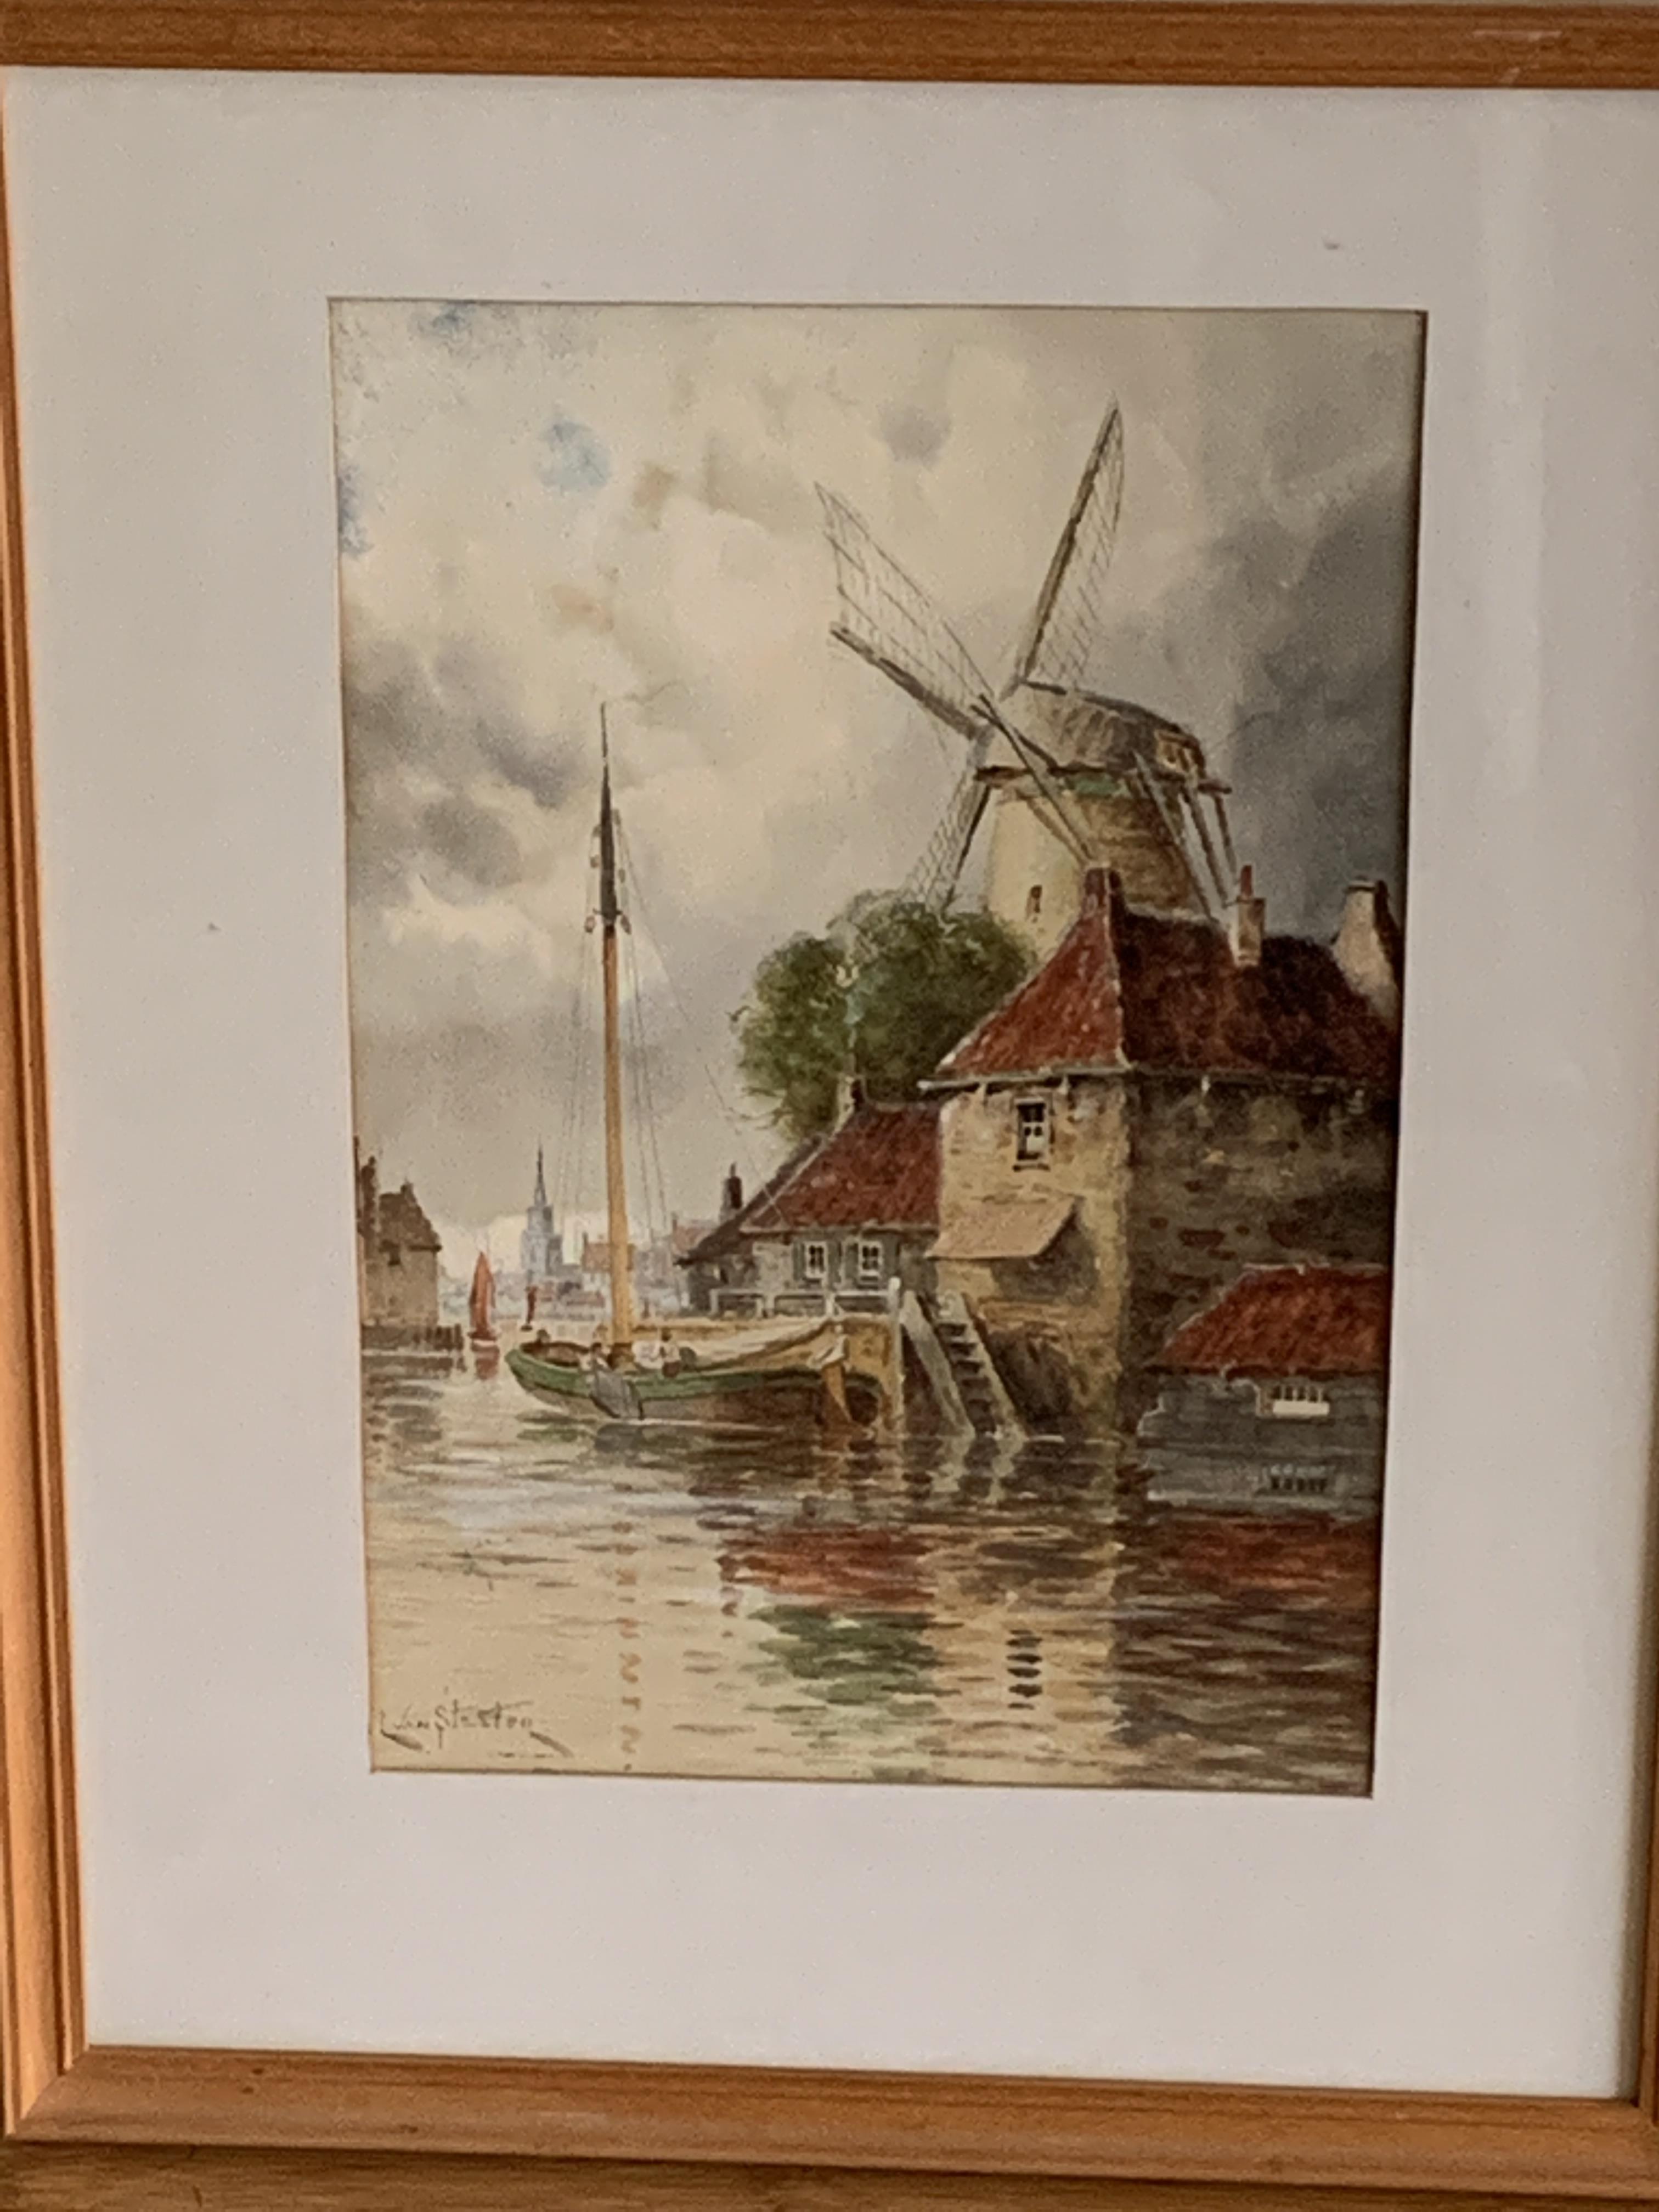 Framed and glazed watercolour, signed L van Staaten - Image 3 of 3